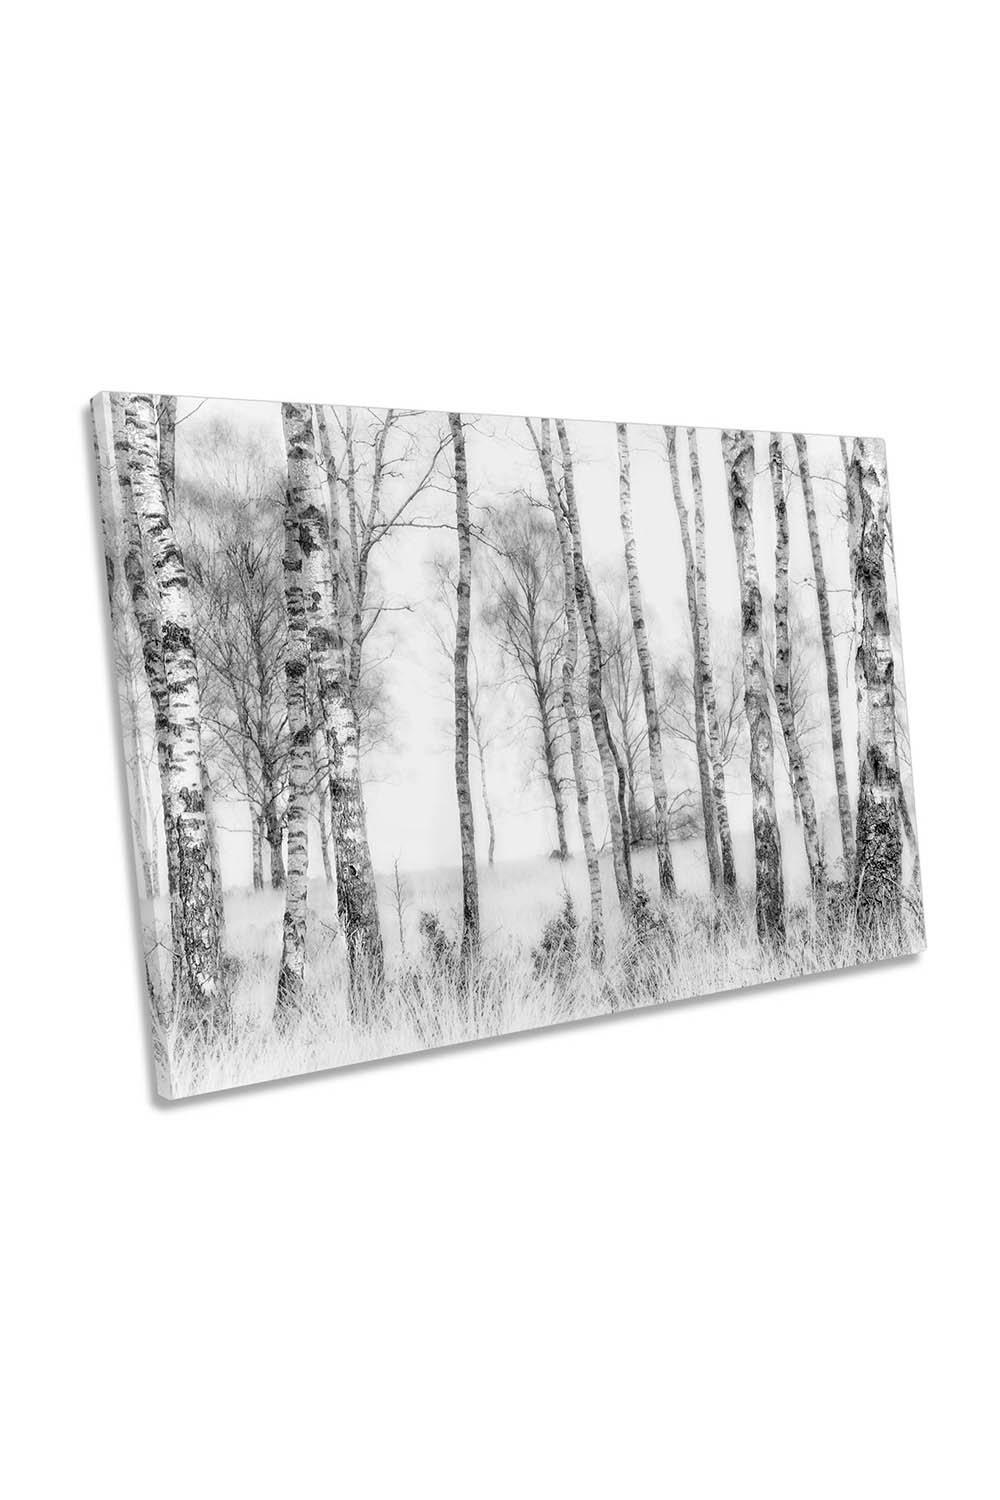 Black and White Birch Trees Forest Canvas Wall Art Picture Print